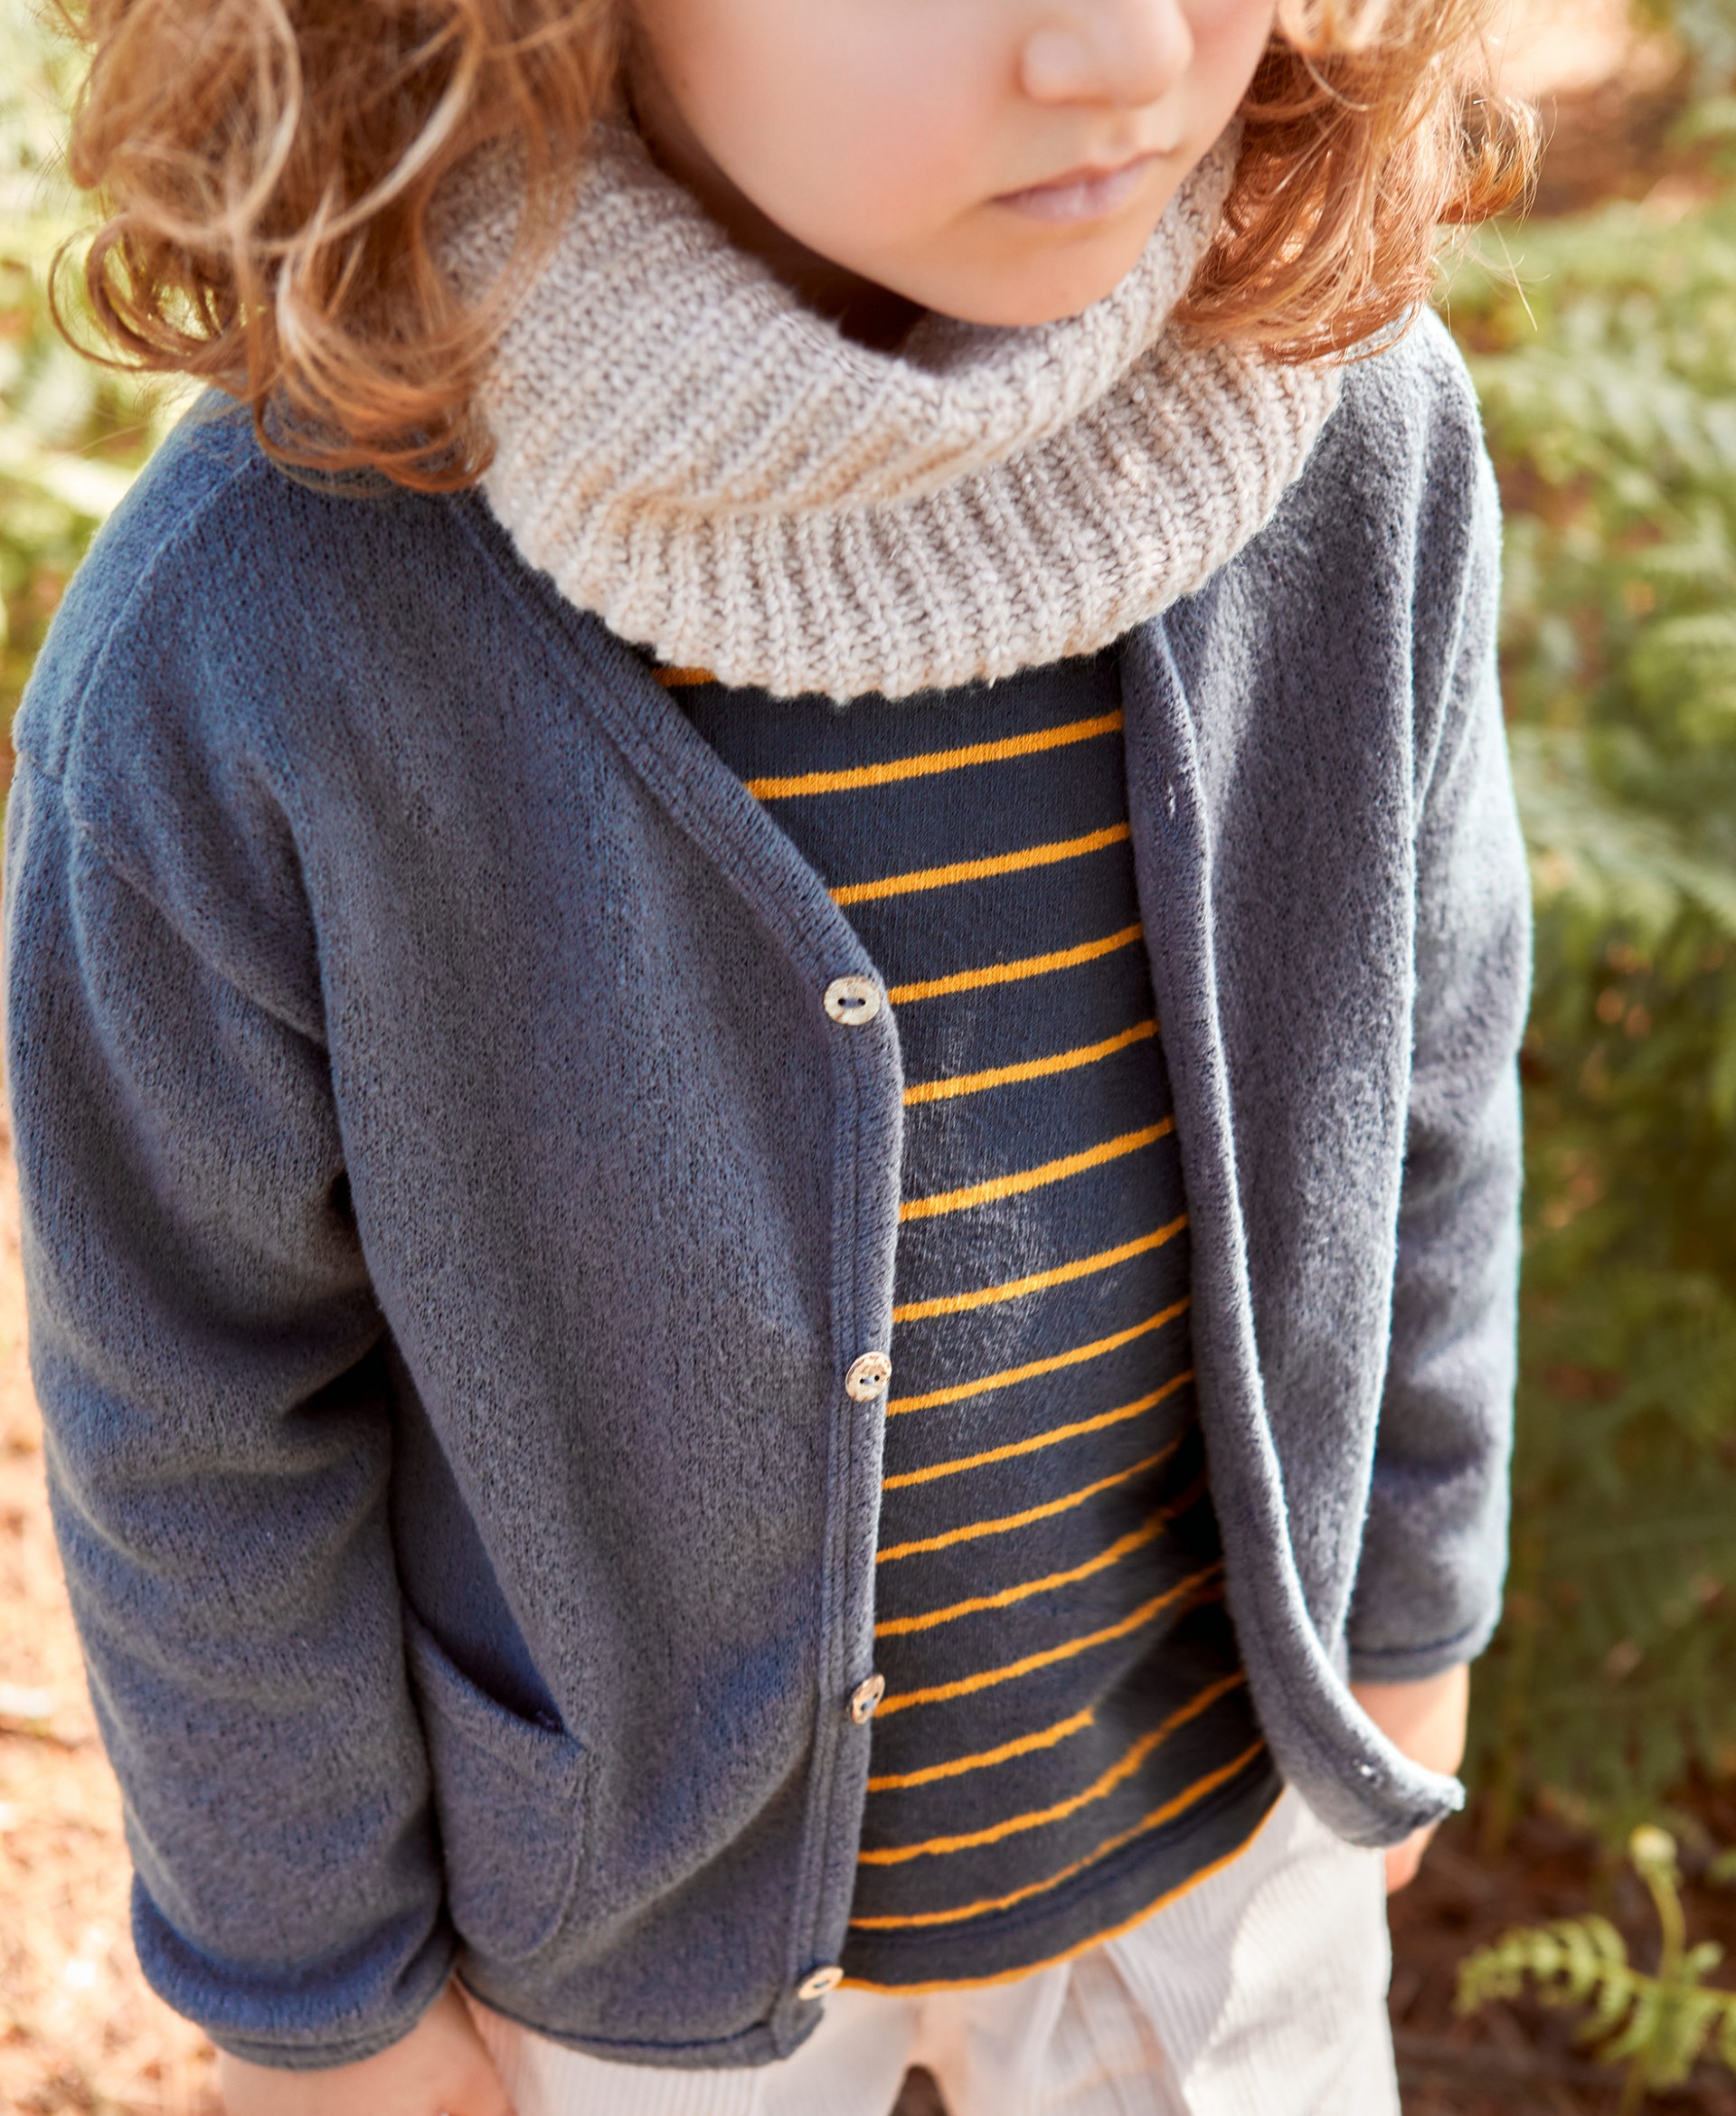 Cardigan with carding inside | Mother Lcia